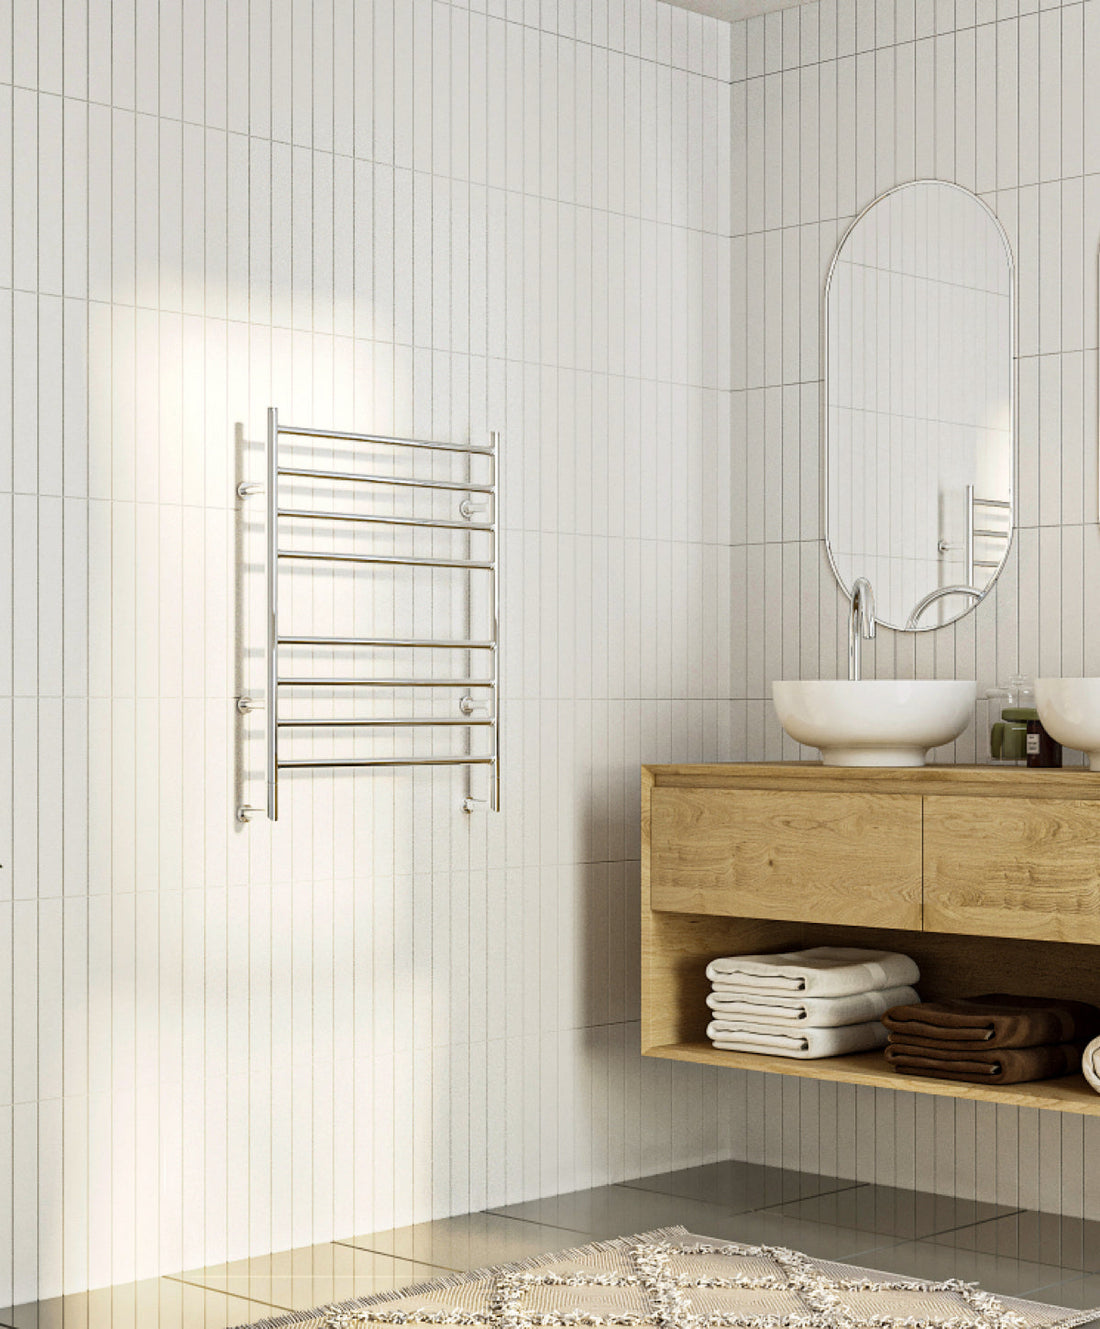 HYDROTHERM H Series - H2 Model - Heated Towel Rail (Electric)